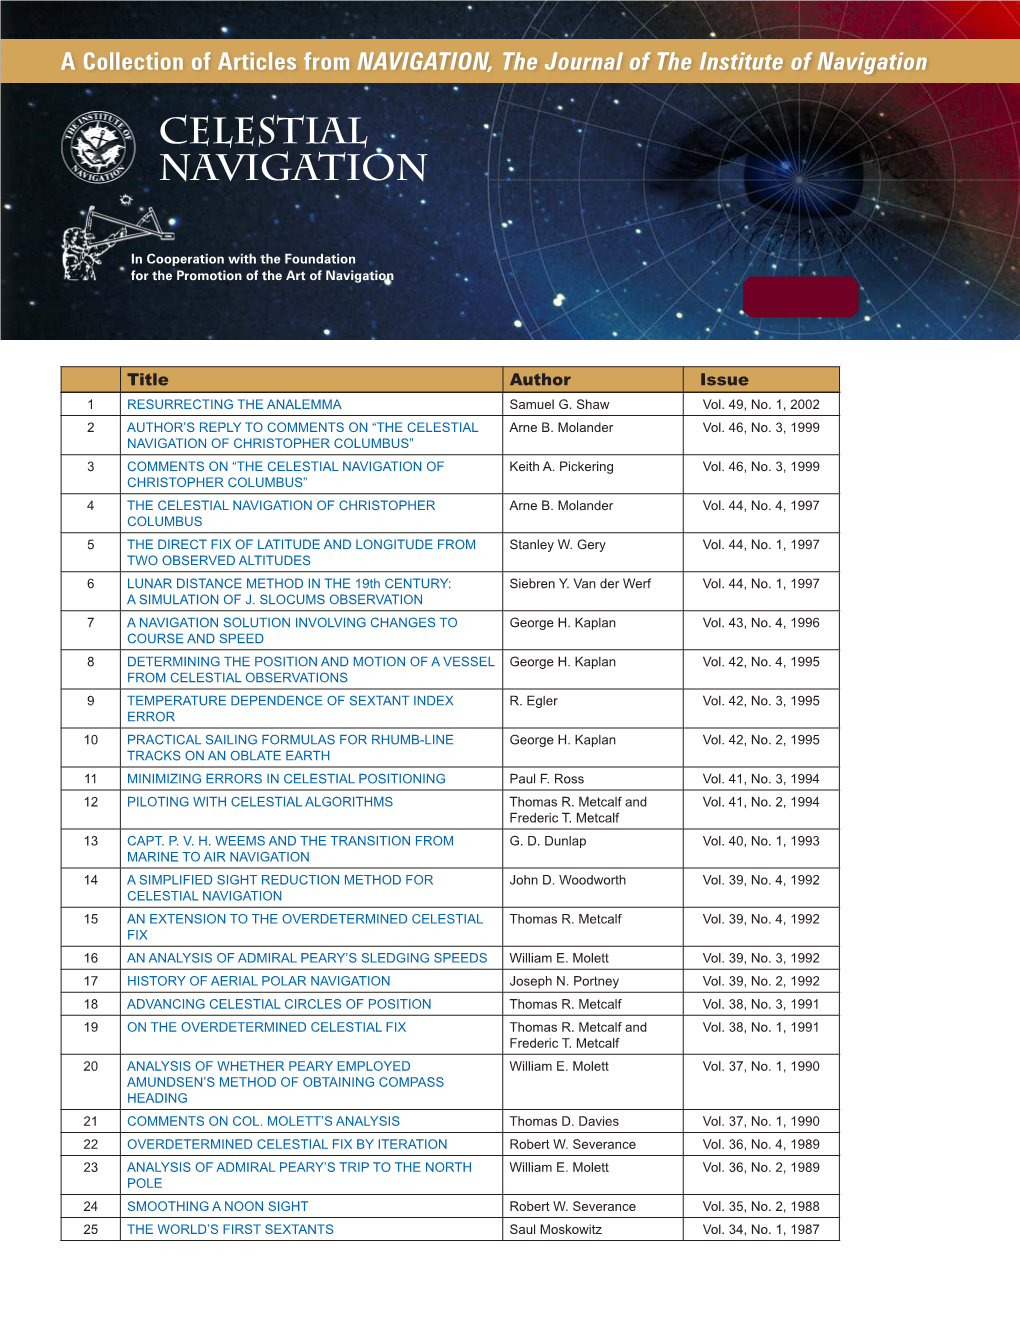 Celestial Navigation CD Table of Contents